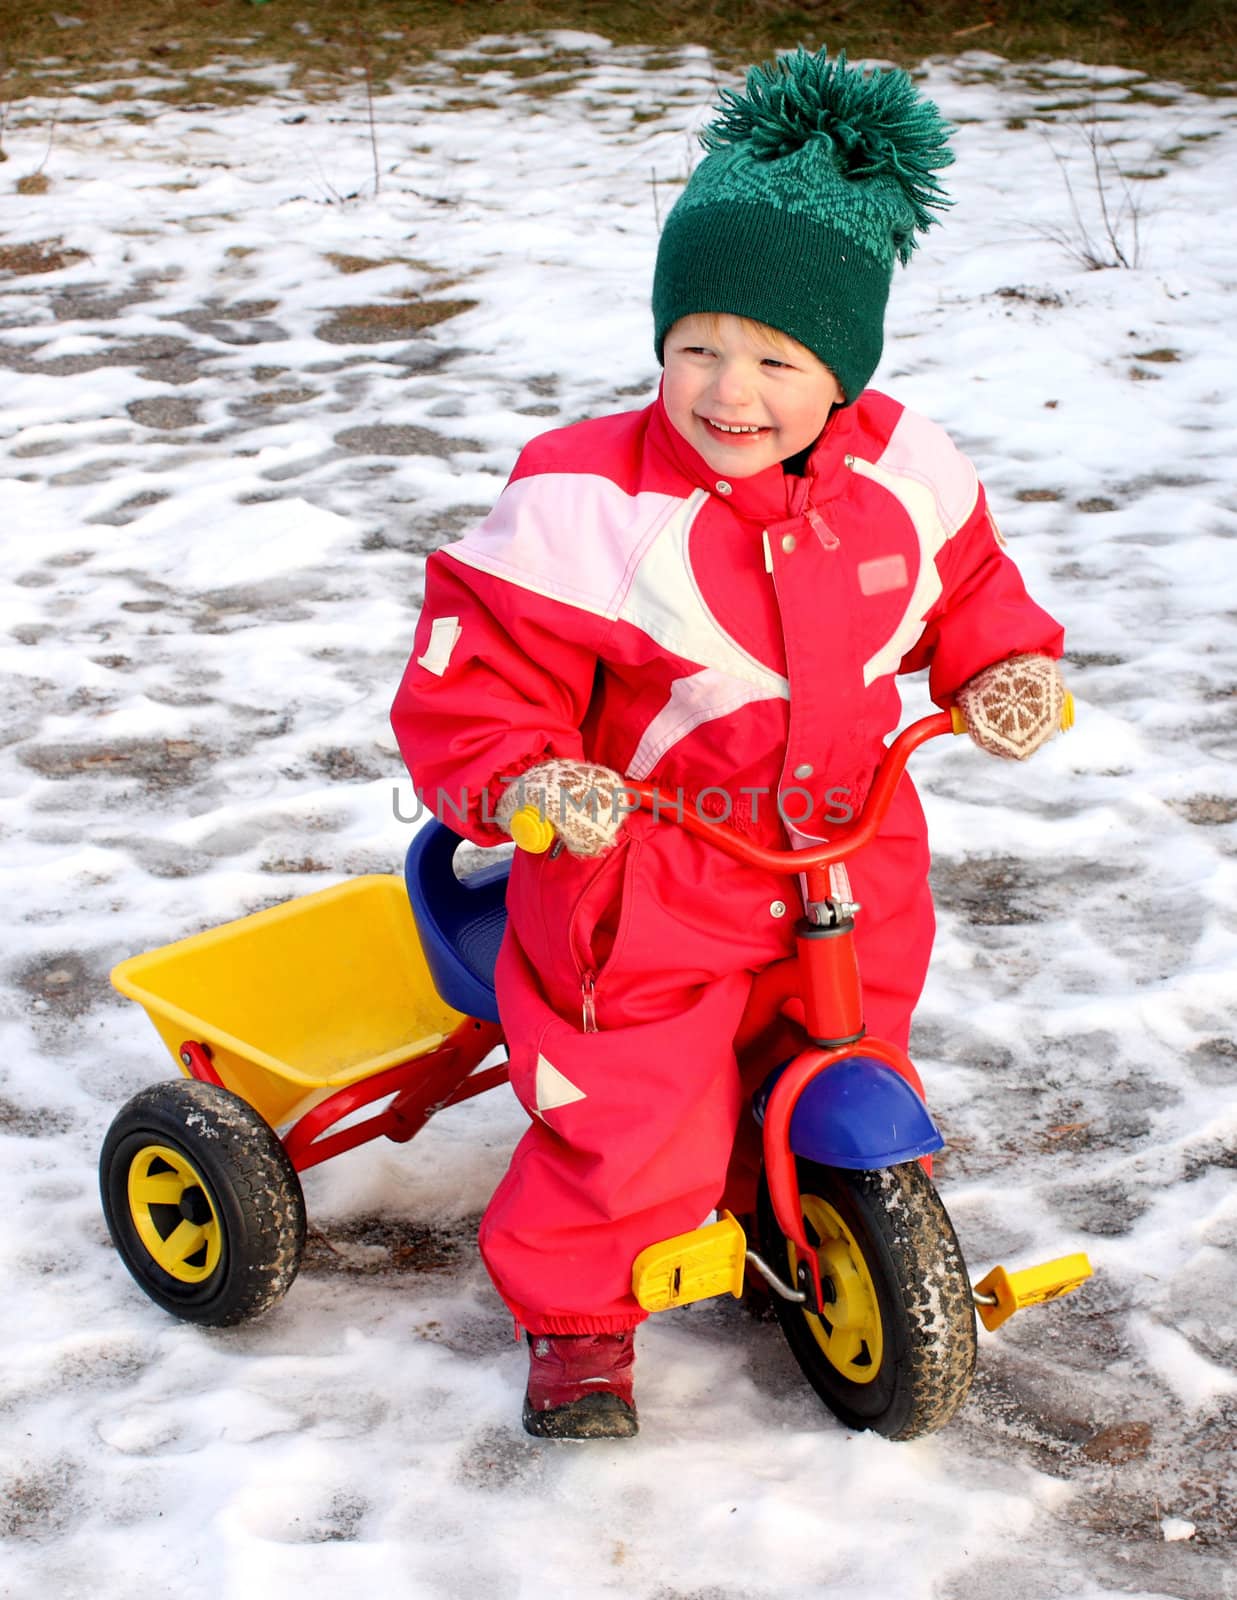 Optimistic child getting her tricycle ready for spring, even though there is still plenty of snow.